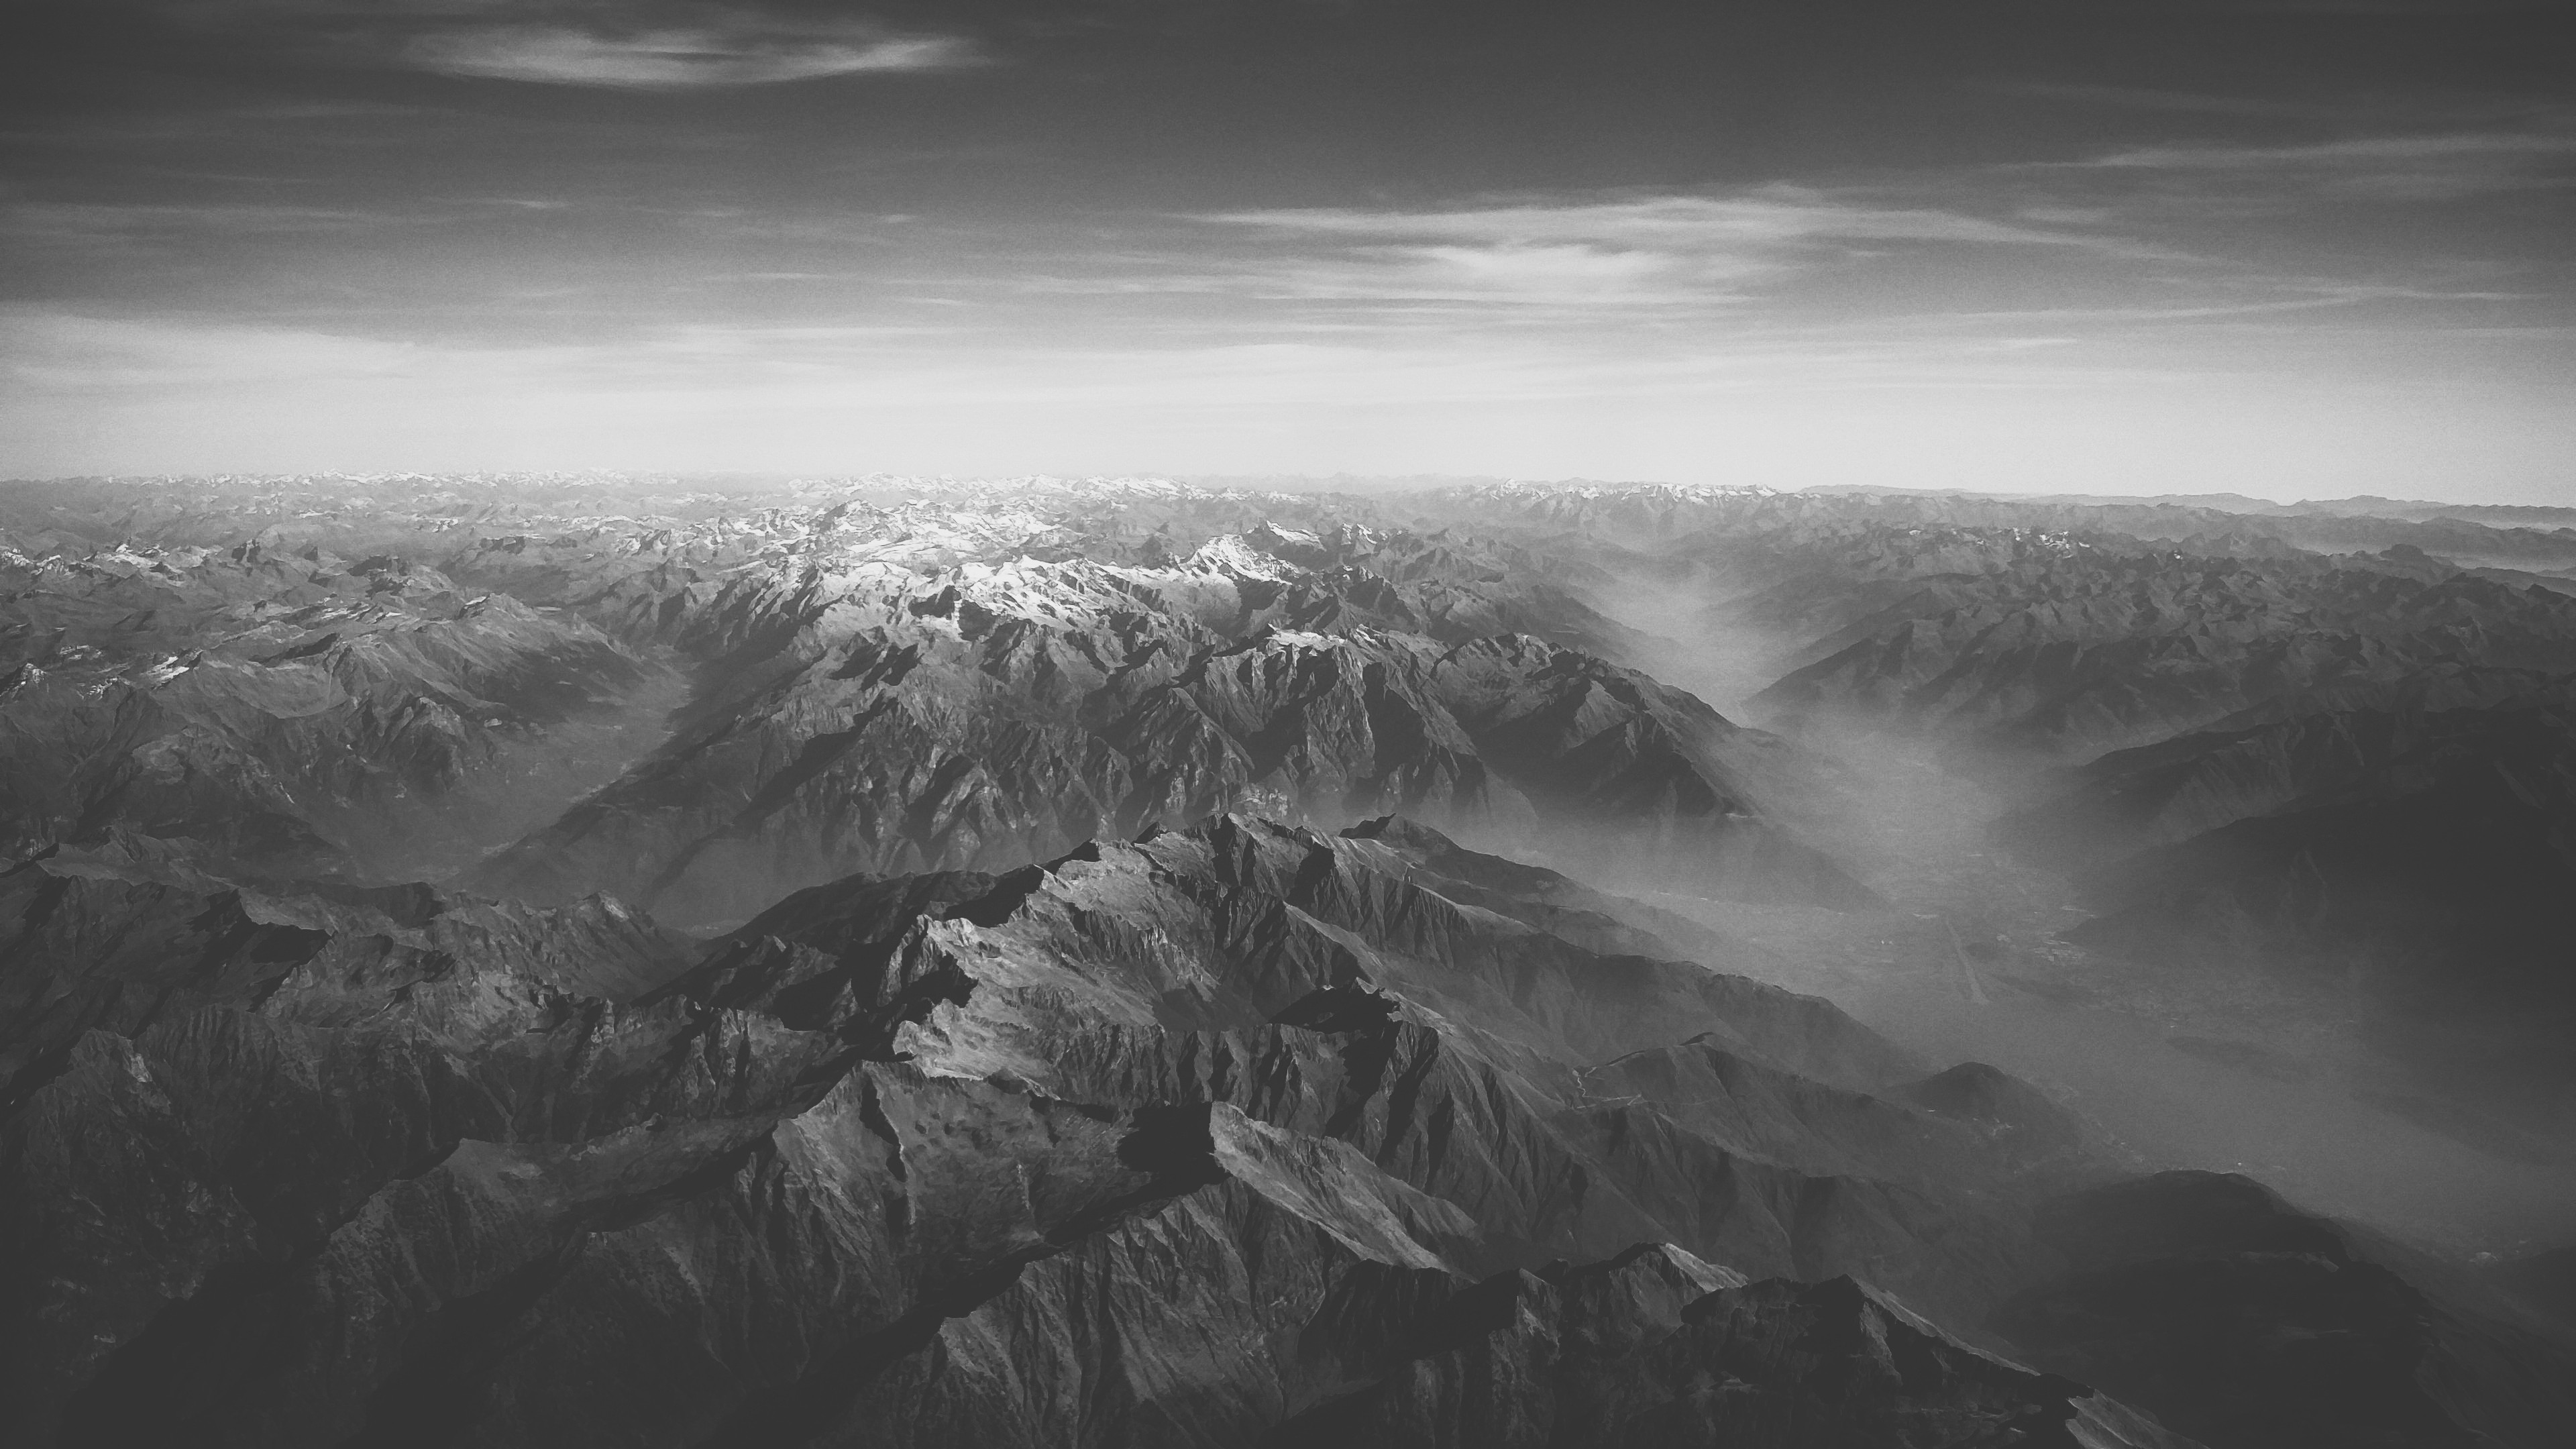 General 3840x2160 landscape nature mountains sky monochrome aerial view